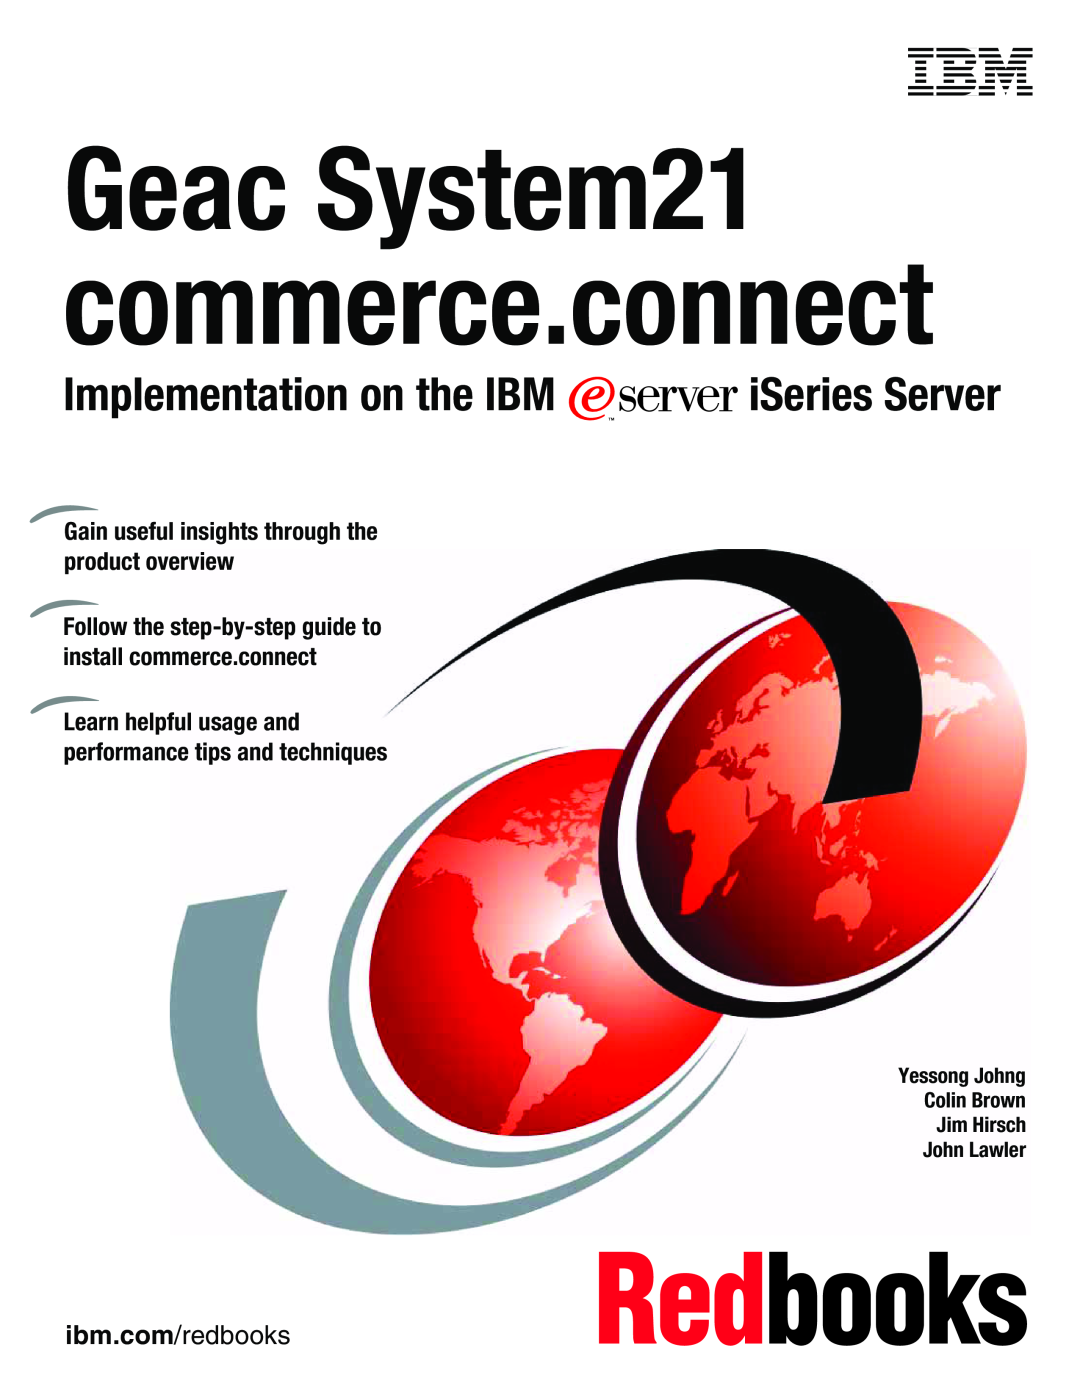 IBM SG24-6526-00 manual Front cover, Yessong Johng Colin Brown Jim Hirsch John Lawler, Geac System21 commerce.connect 